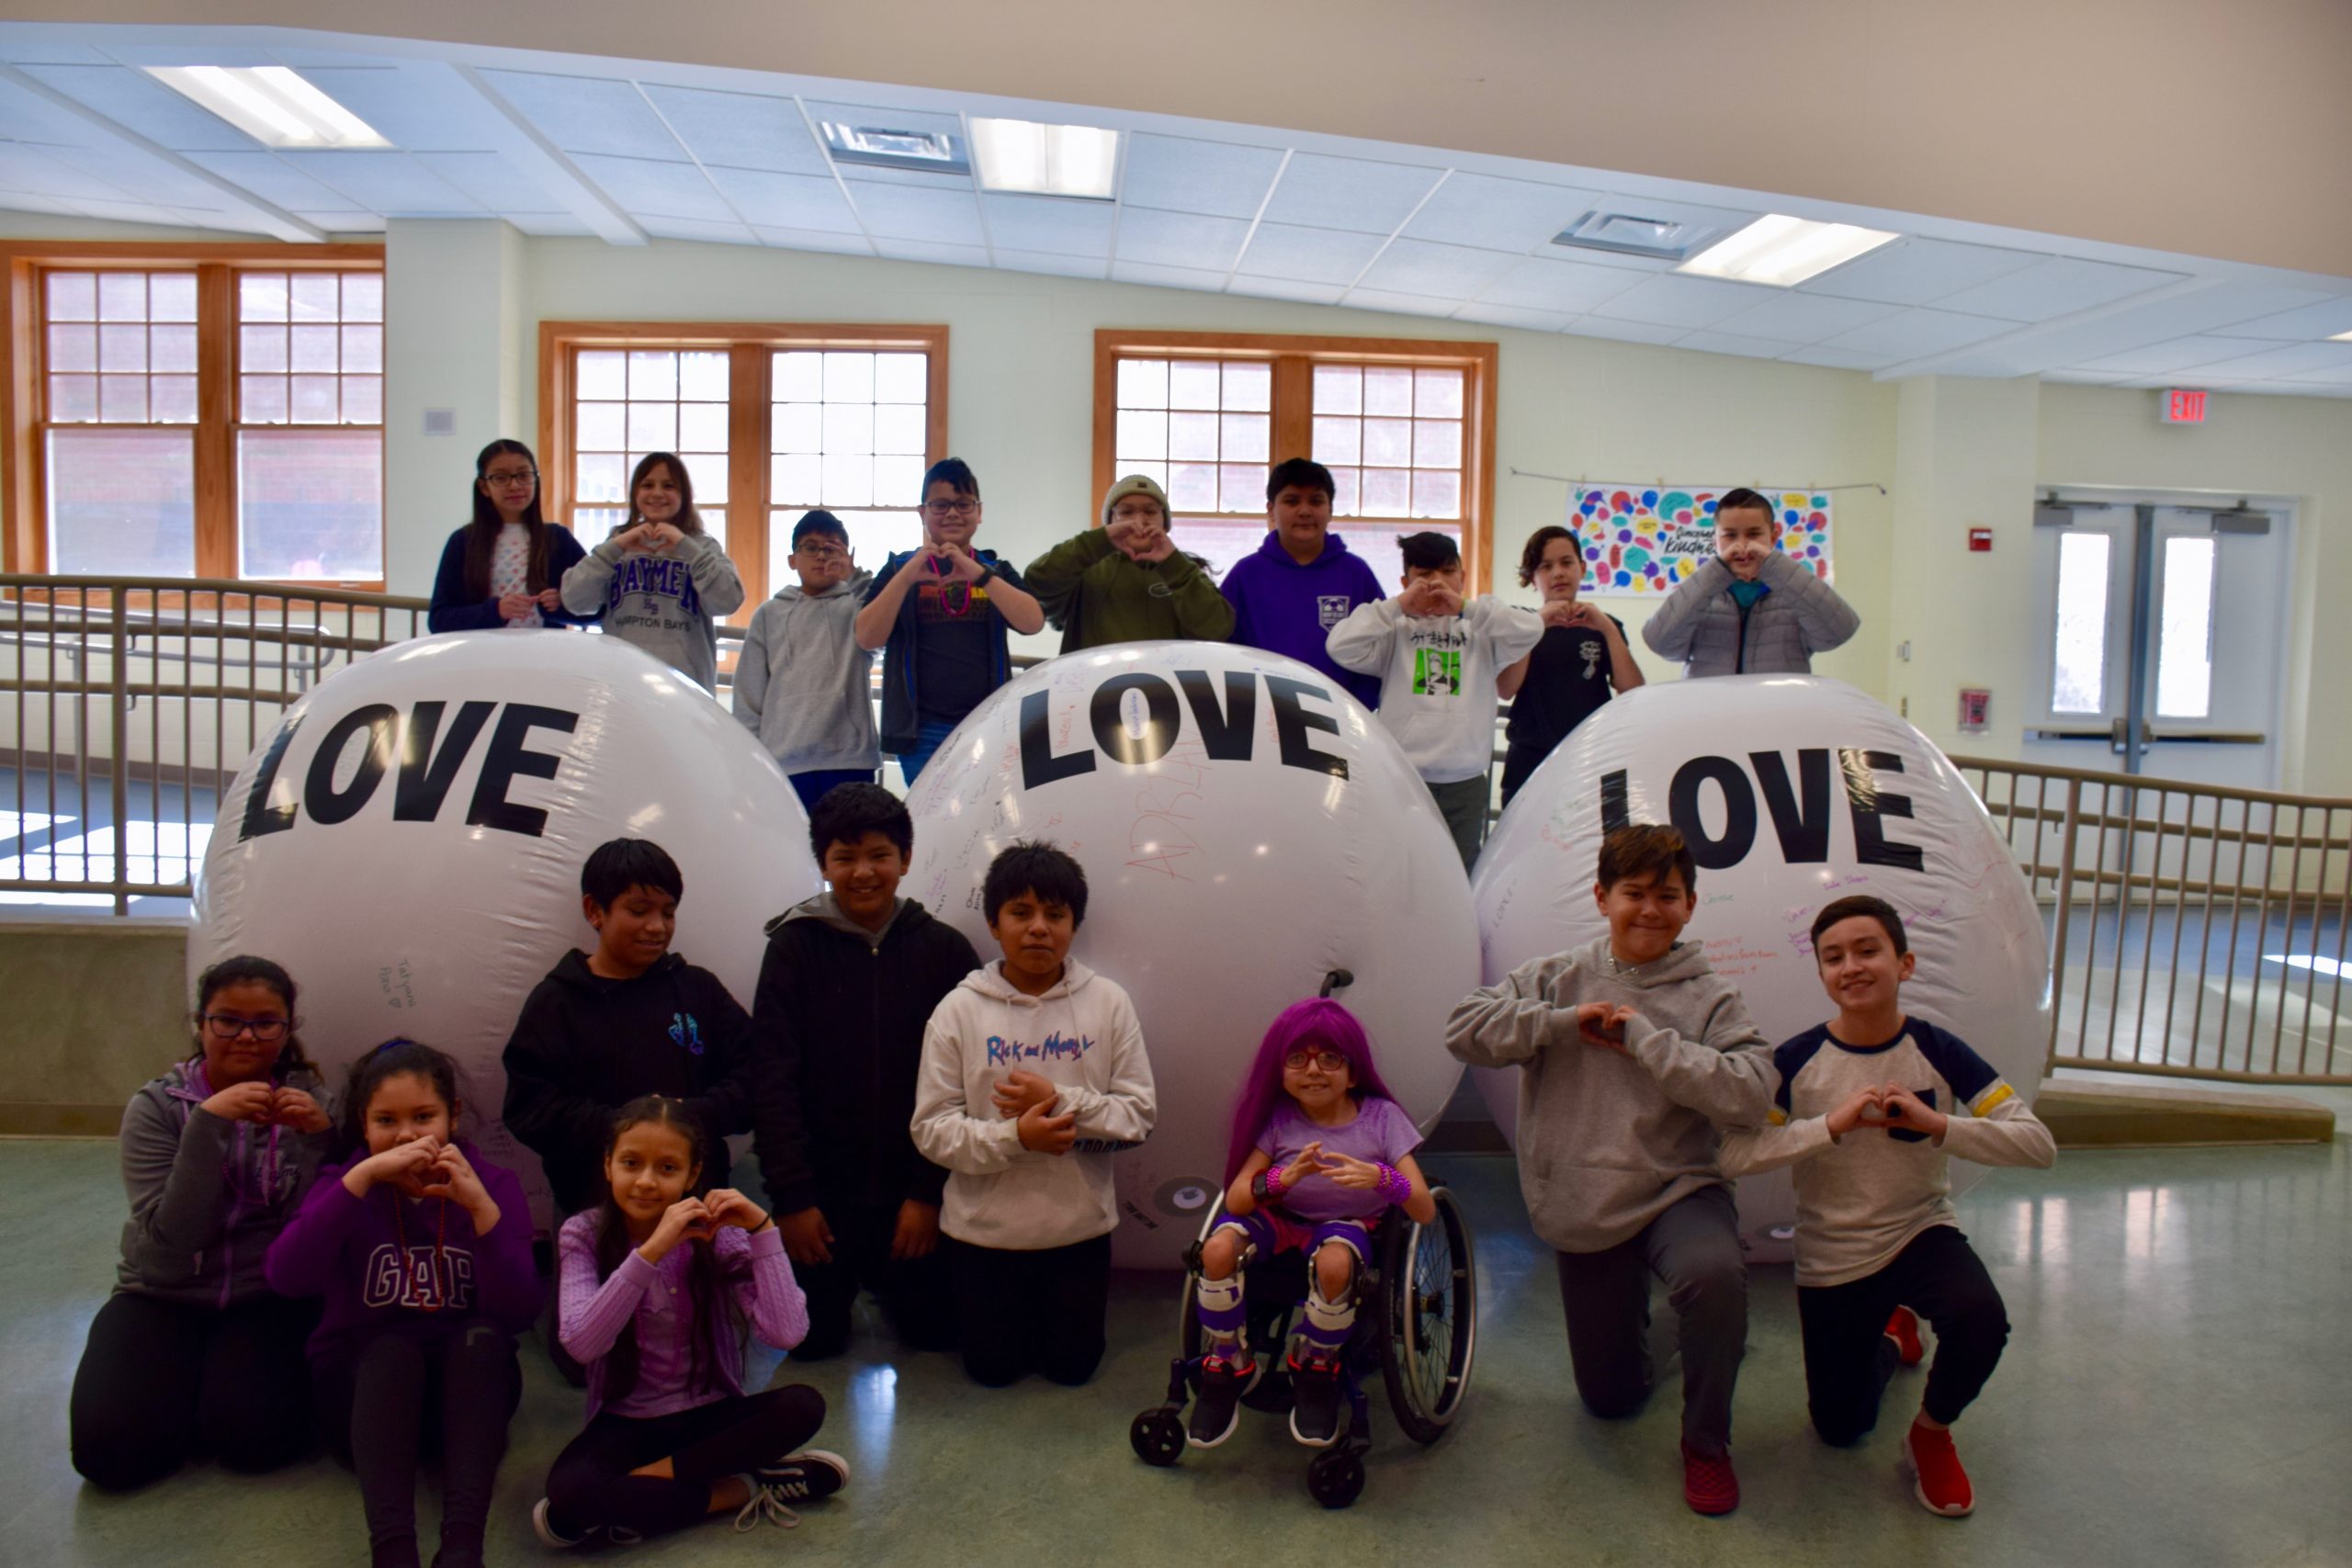 Continuing its mission to foster a culture of kindness, Hampton Bays Middle School held P.S. I Love You Day, an initiative where students took part in a variety of activities throughout the week of February 10. Now in its 10th year, P.S. I Love You Day aims to raise awareness about bullying and suicide while promoting kindness.